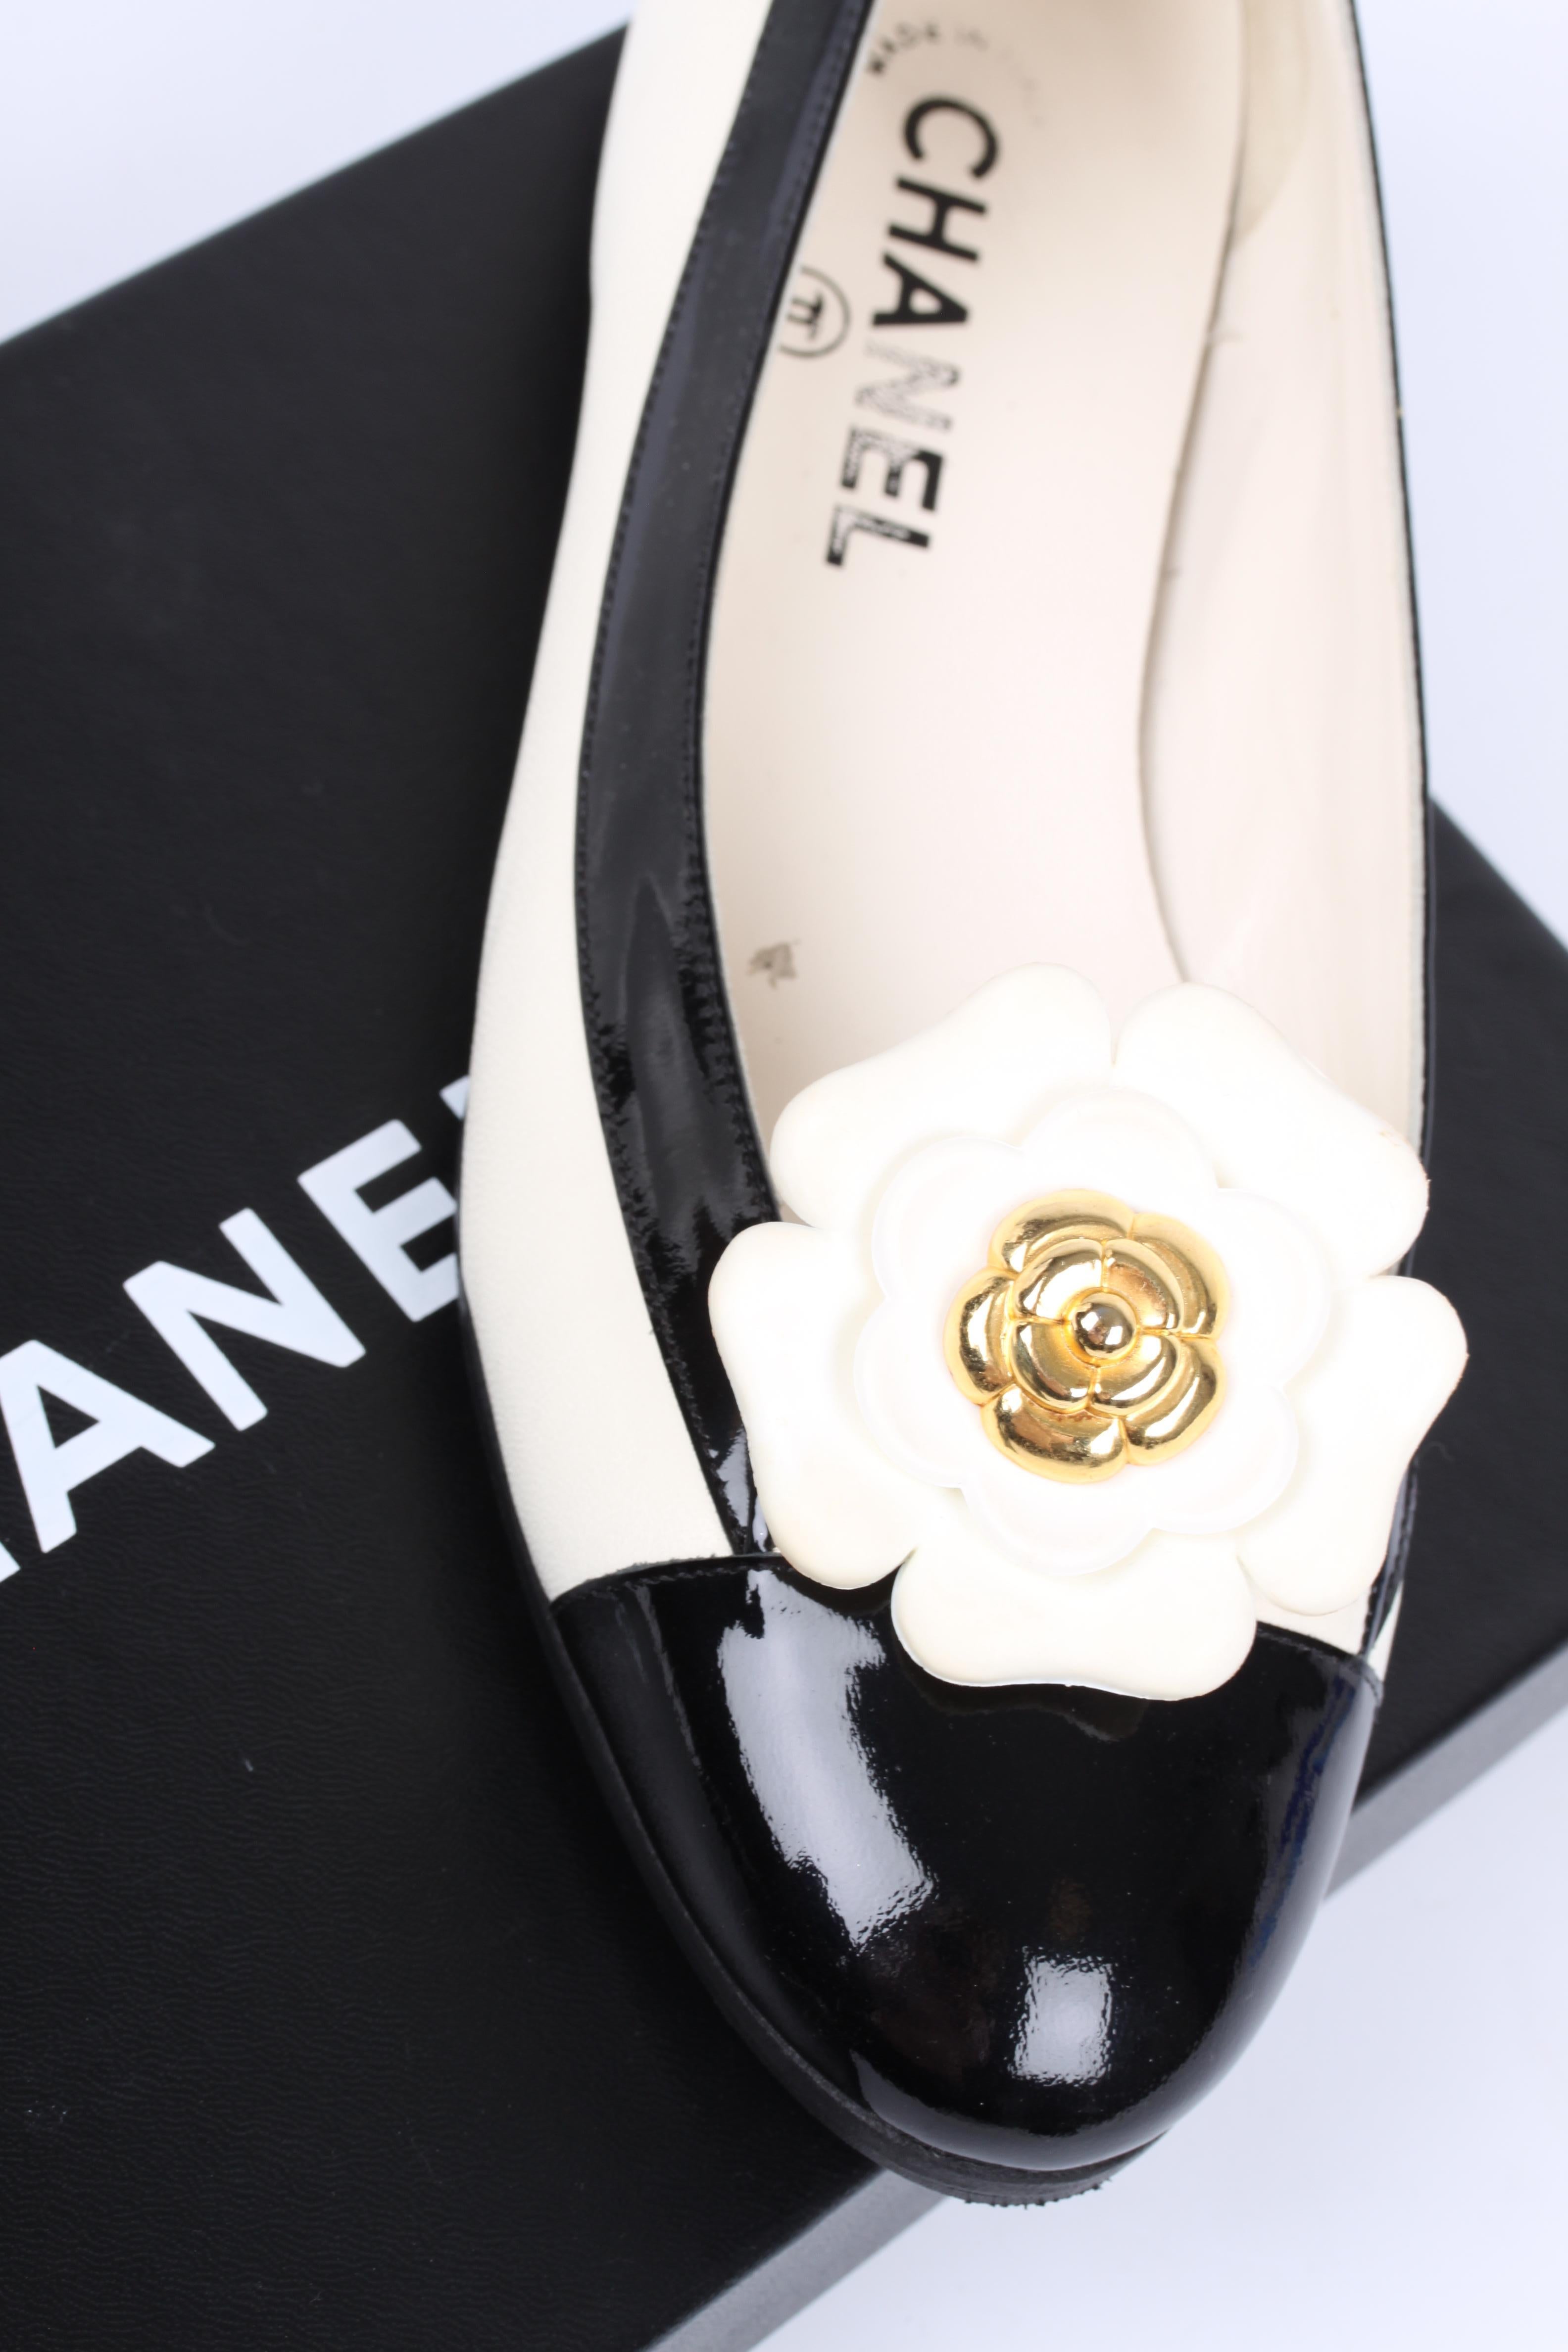 Vintage Chanel XXL Camellia Earrings in white resin with gold-tone detailing. A gold-tone clip-on on the back. Super large size, diameter 6,5 centimeters. Fantastic to spice up any outfit, and on a pair of shoes they look amazing.

This pair has